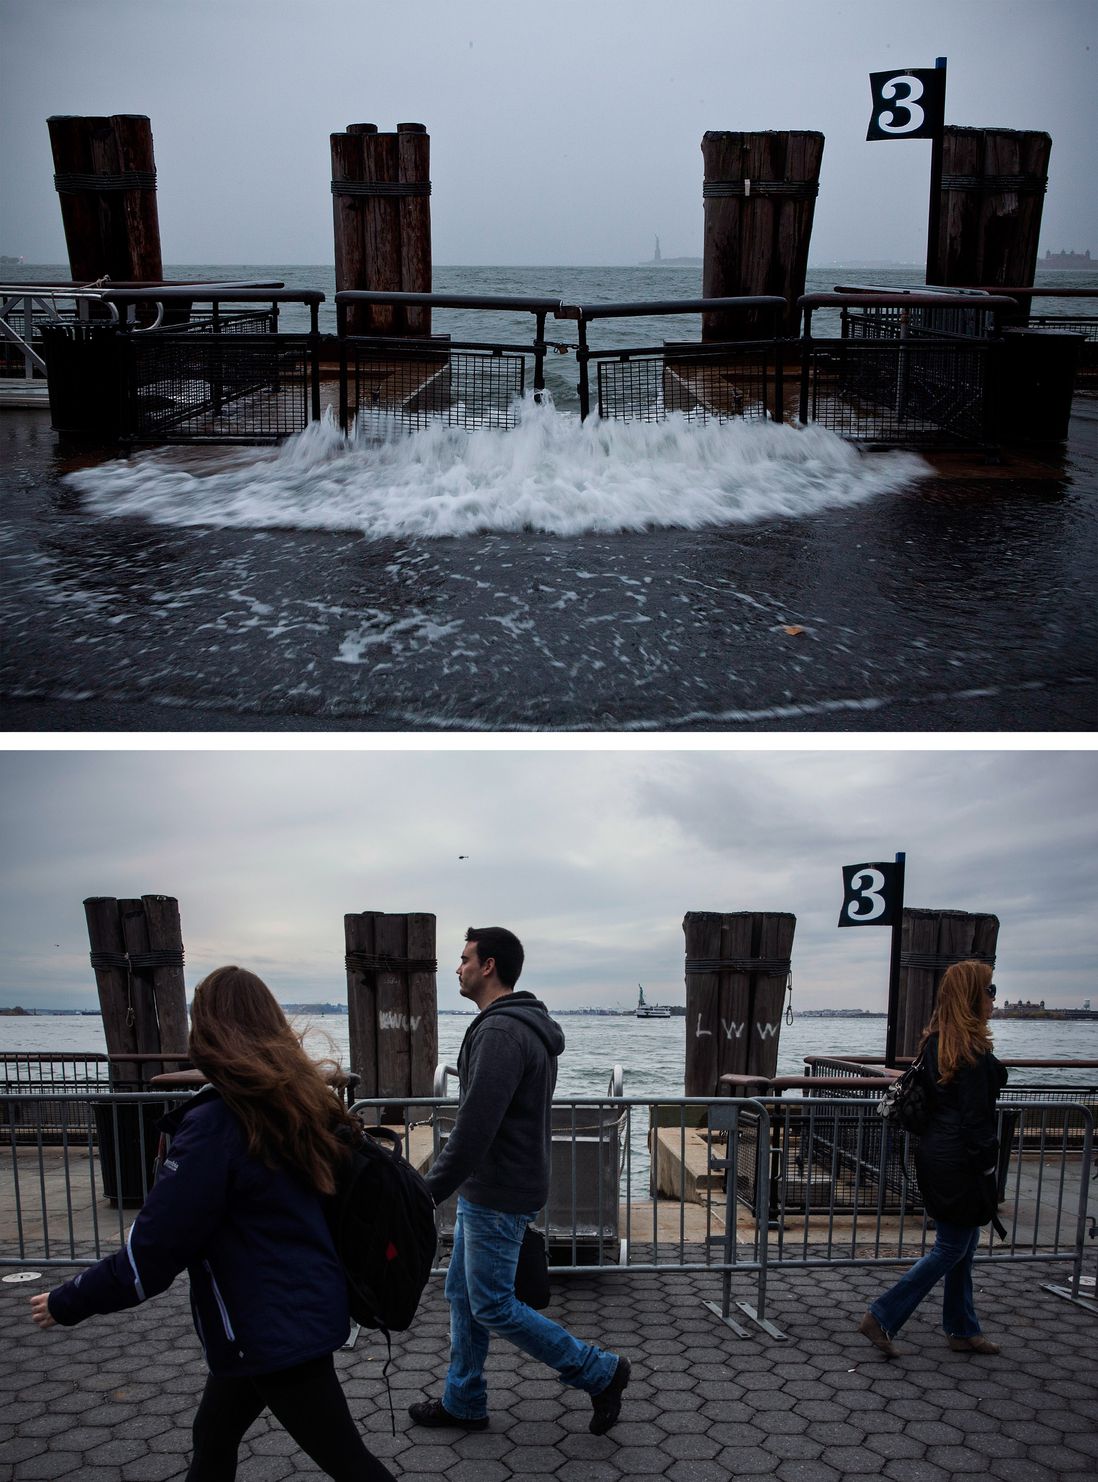 [Top] Rising water caused by Superstorm Sandy rushes onto the pathway at Battery Park on October 29, 2012 in New York City. [Bottom] Tourists walk along the pathway in Battery Park October 23, 2013.